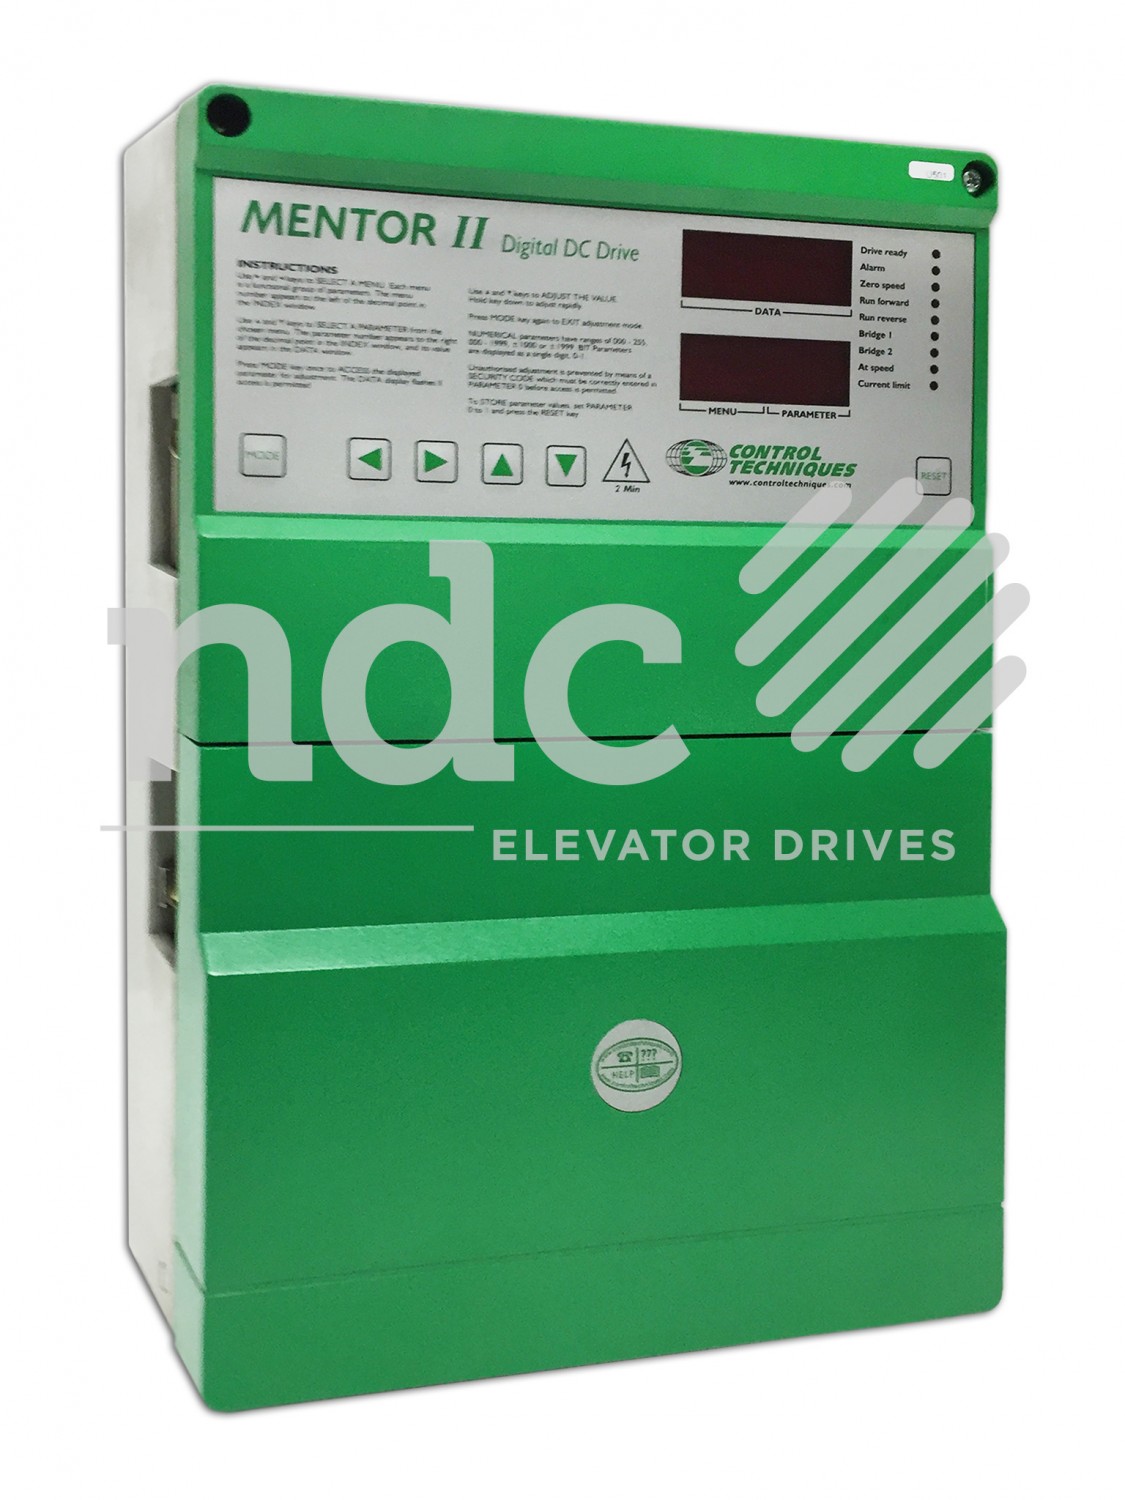 Control Techniques Mentor II DC Drive75 HP M155R-14ICD220/480 Tested 